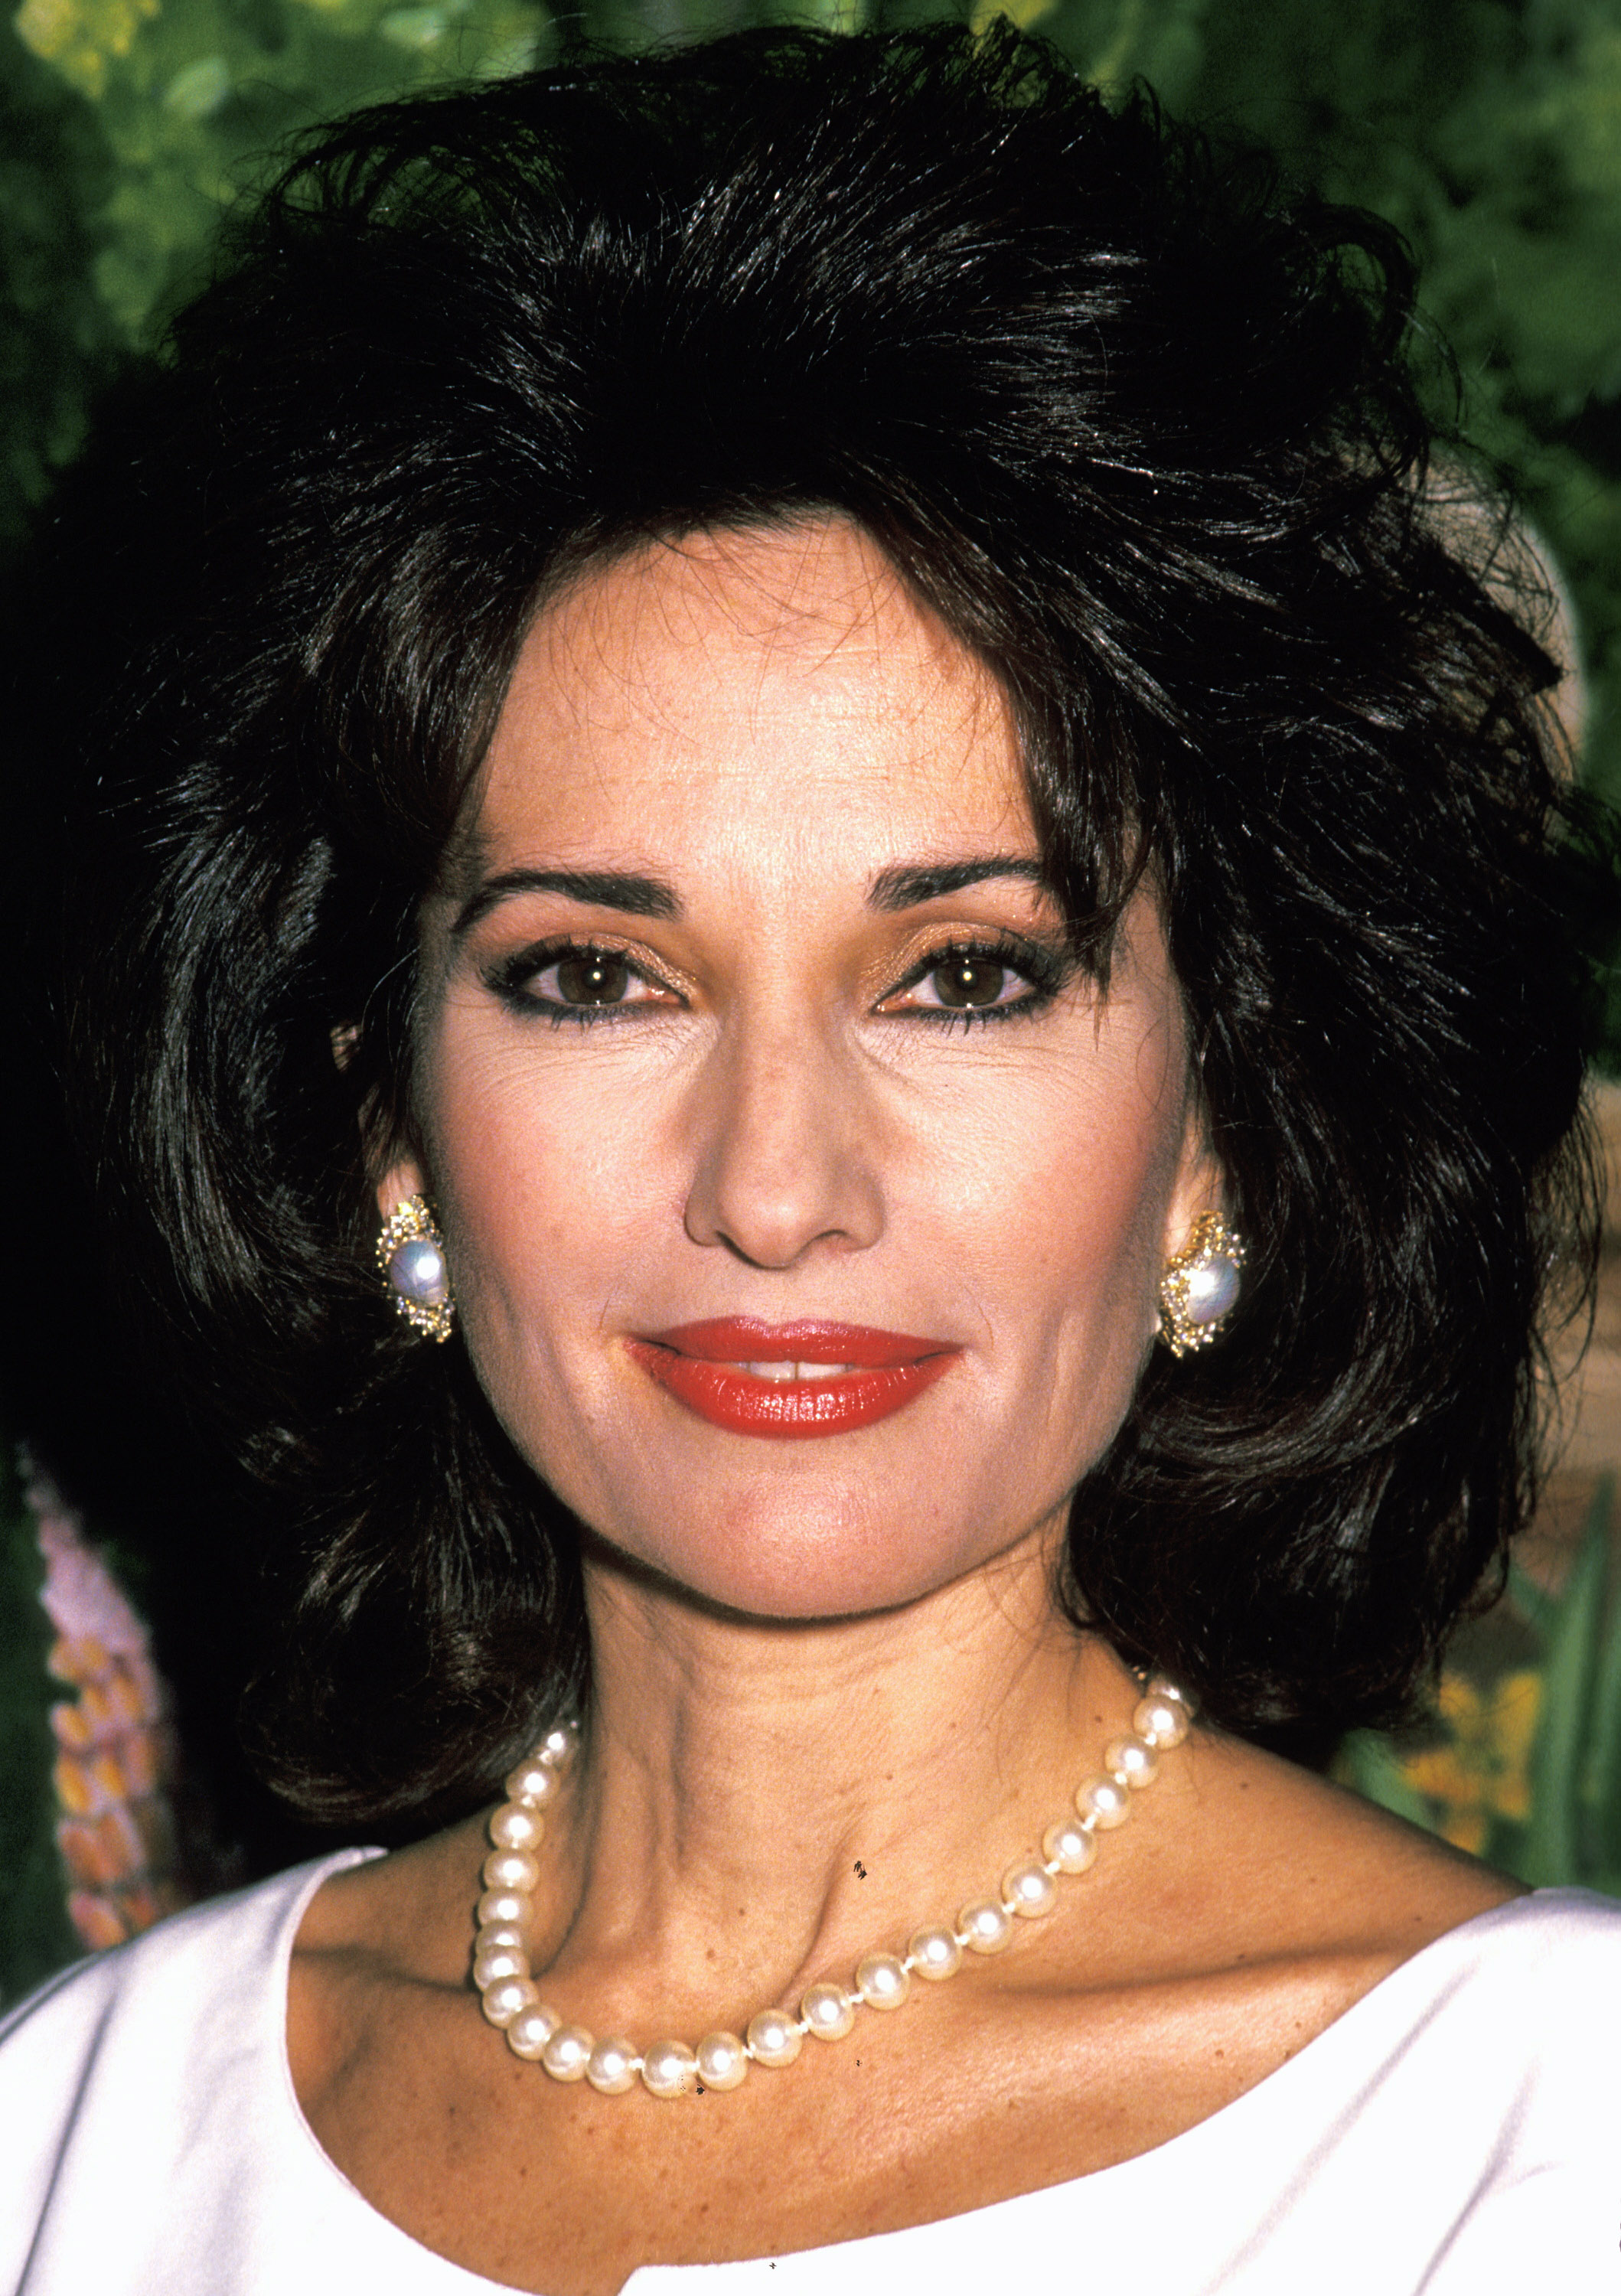 Susan Lucci attends the American Perfumers annual meeting and reception on January 19, 1994 in New York City | Source: Getty Images